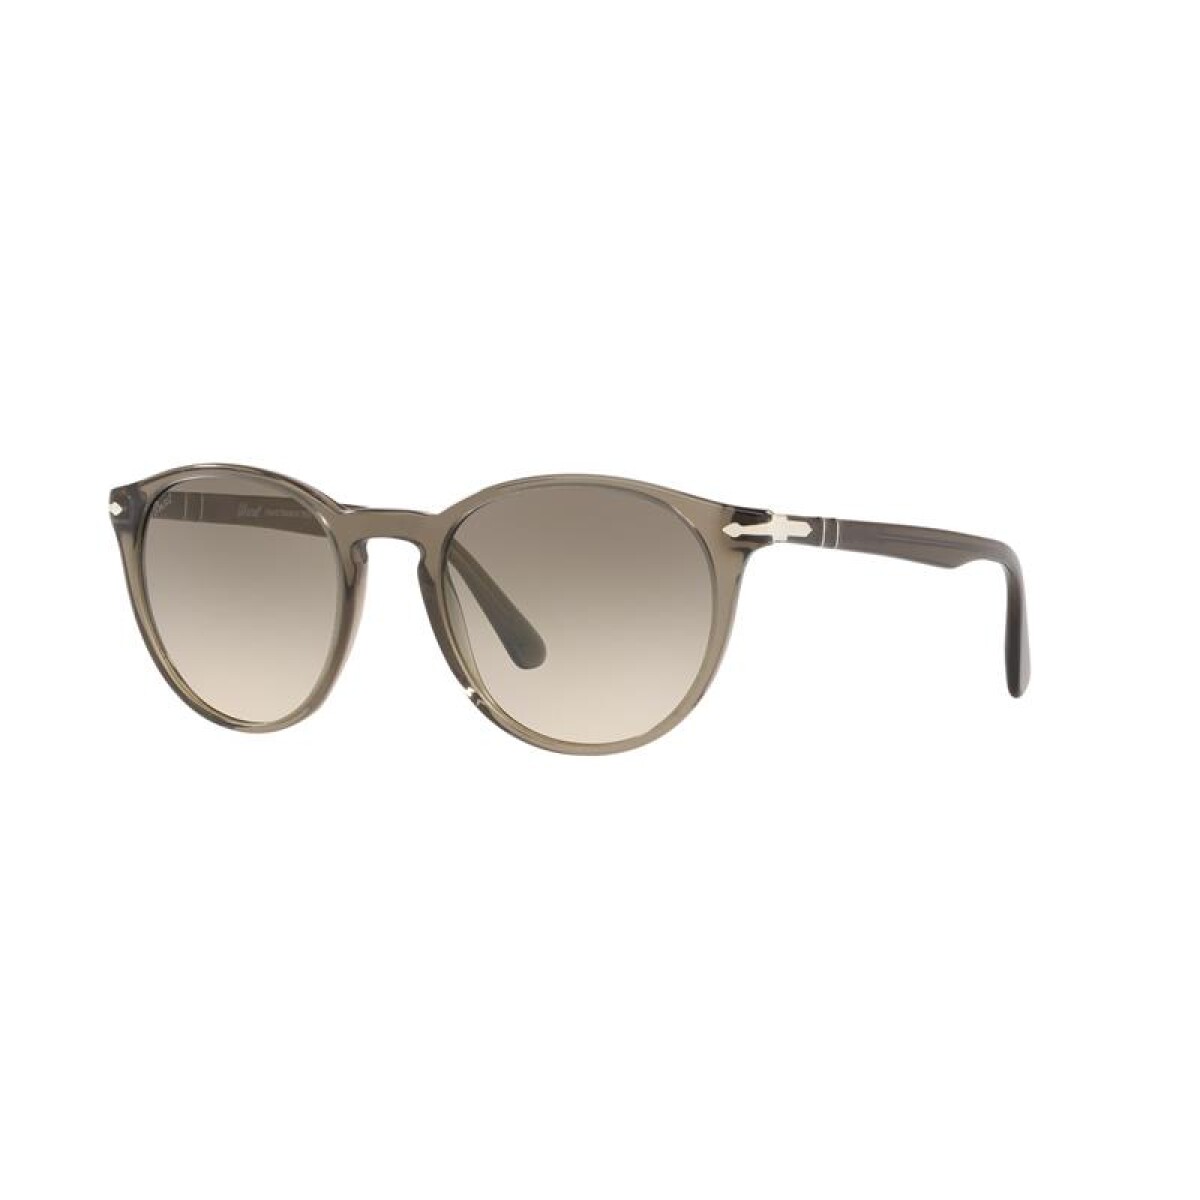 Persol 3152-s - 9061/32 